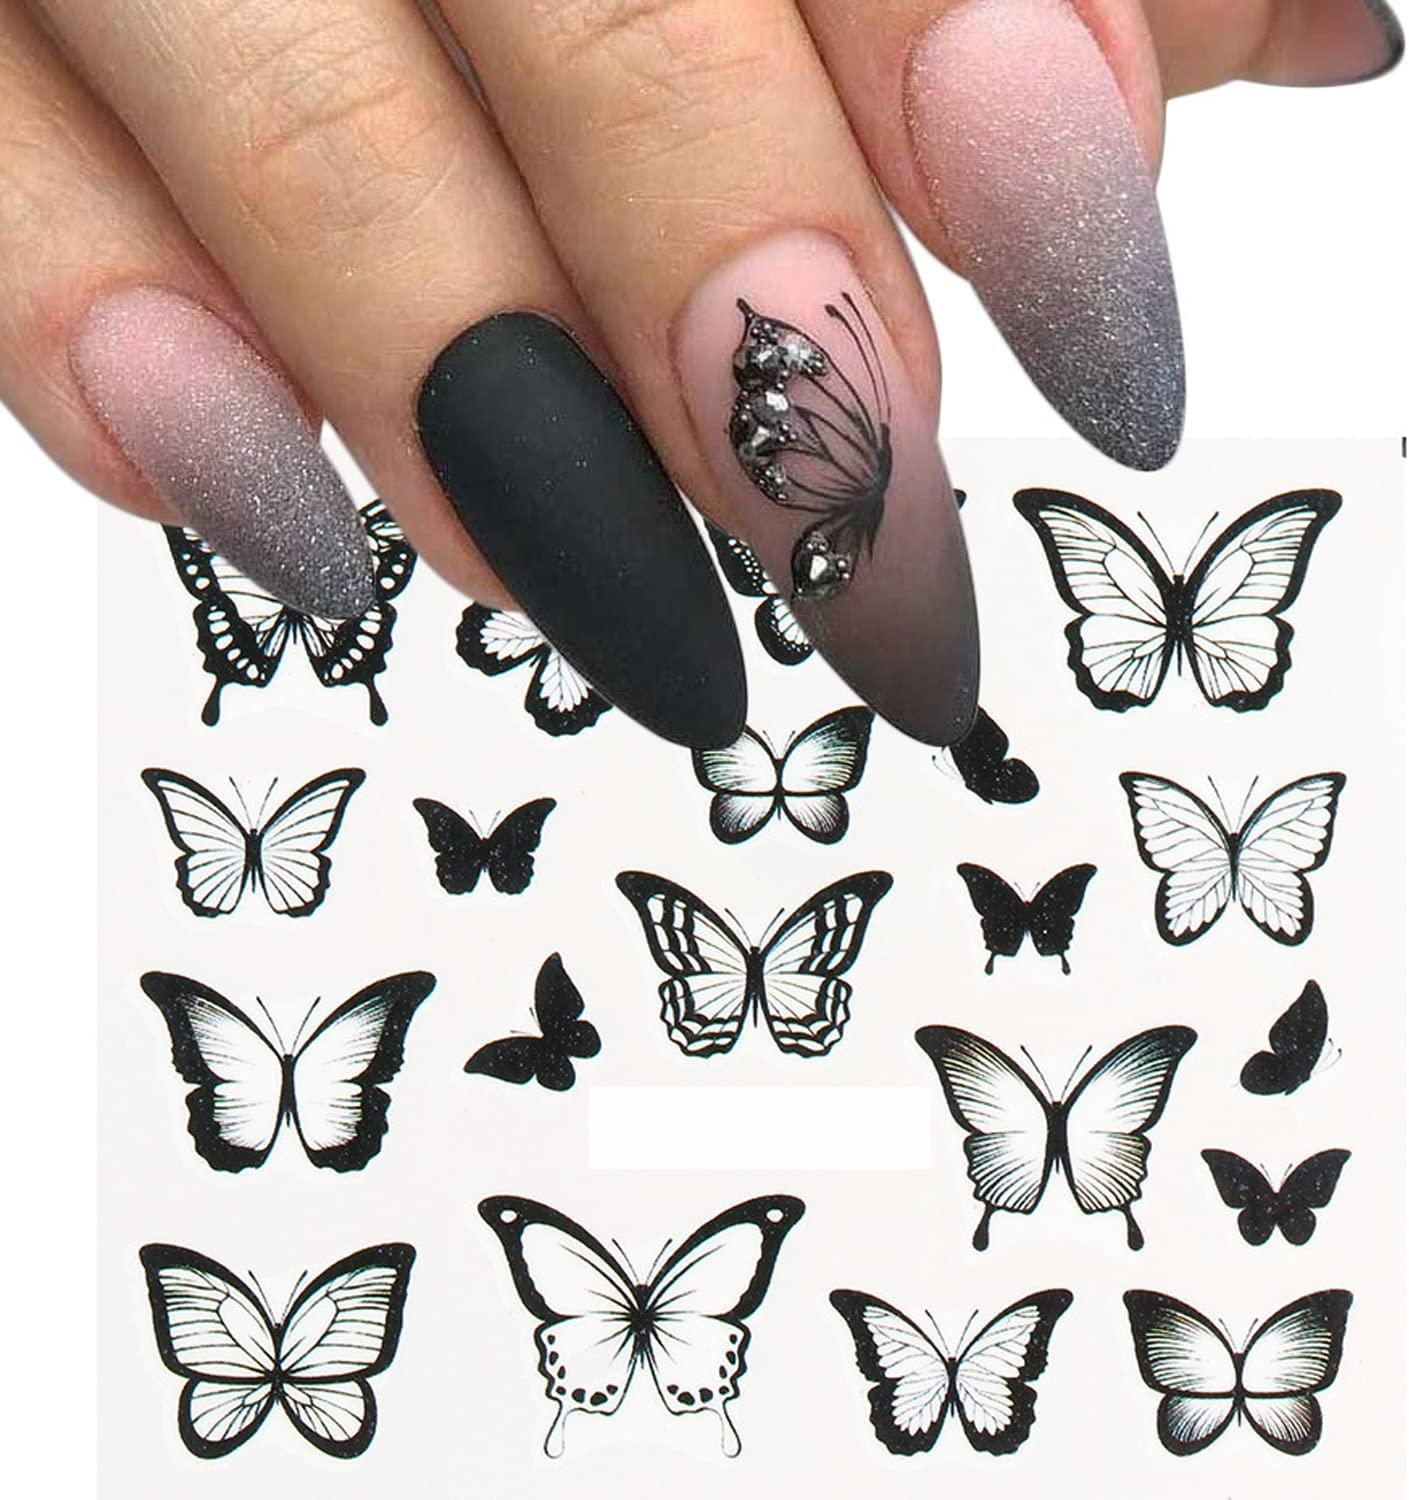 Beautiful butterfly nail art ideas for your next manicure appointment